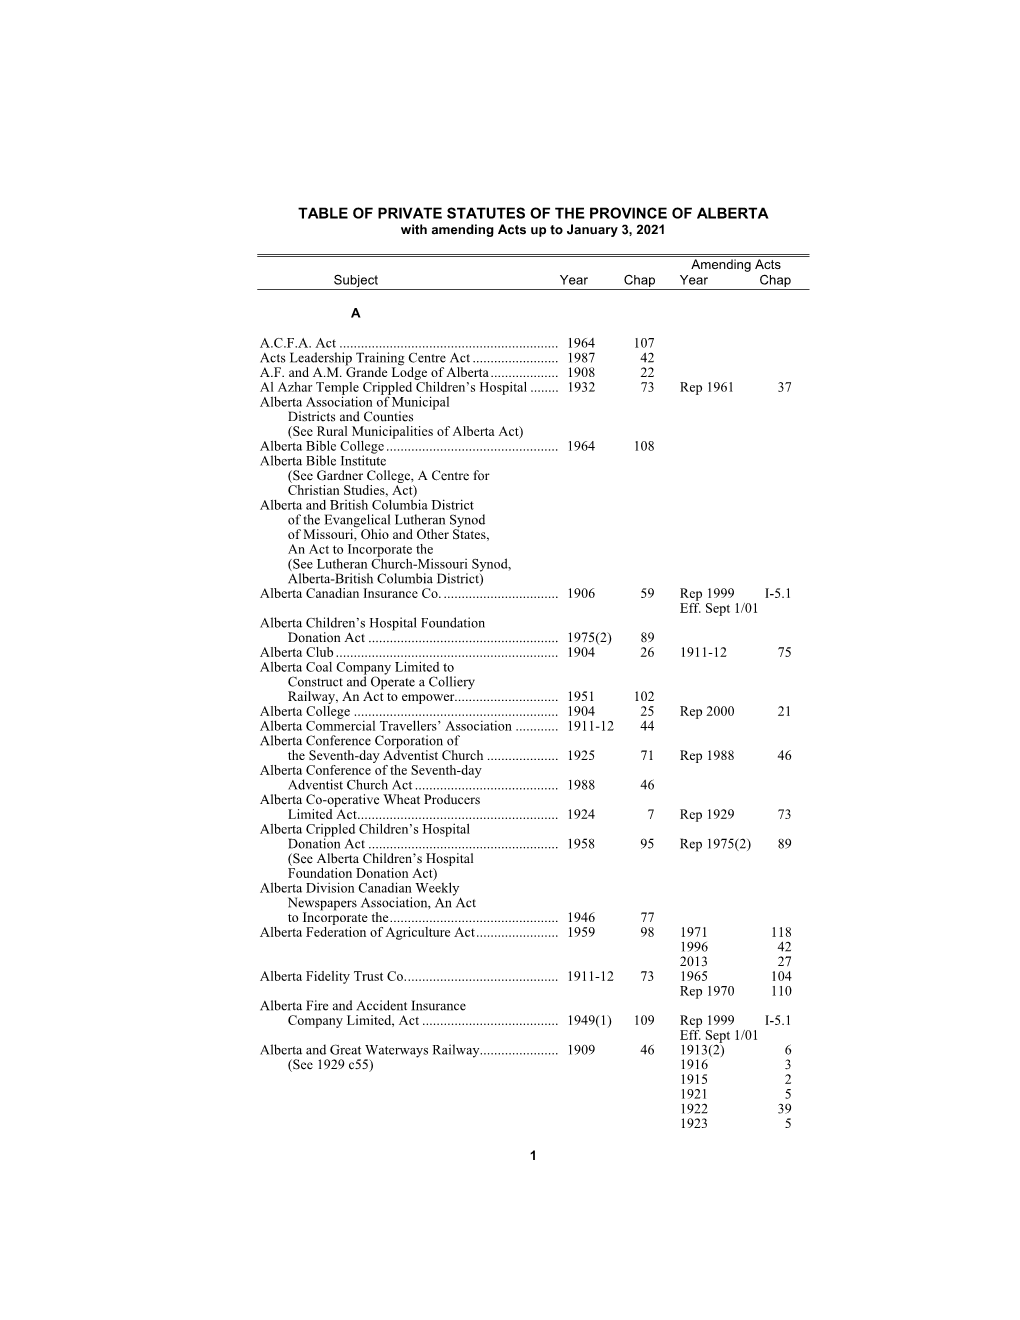 TABLE of PRIVATE STATUTES of the PROVINCE of ALBERTA with Amending Acts up to January 3, 2021